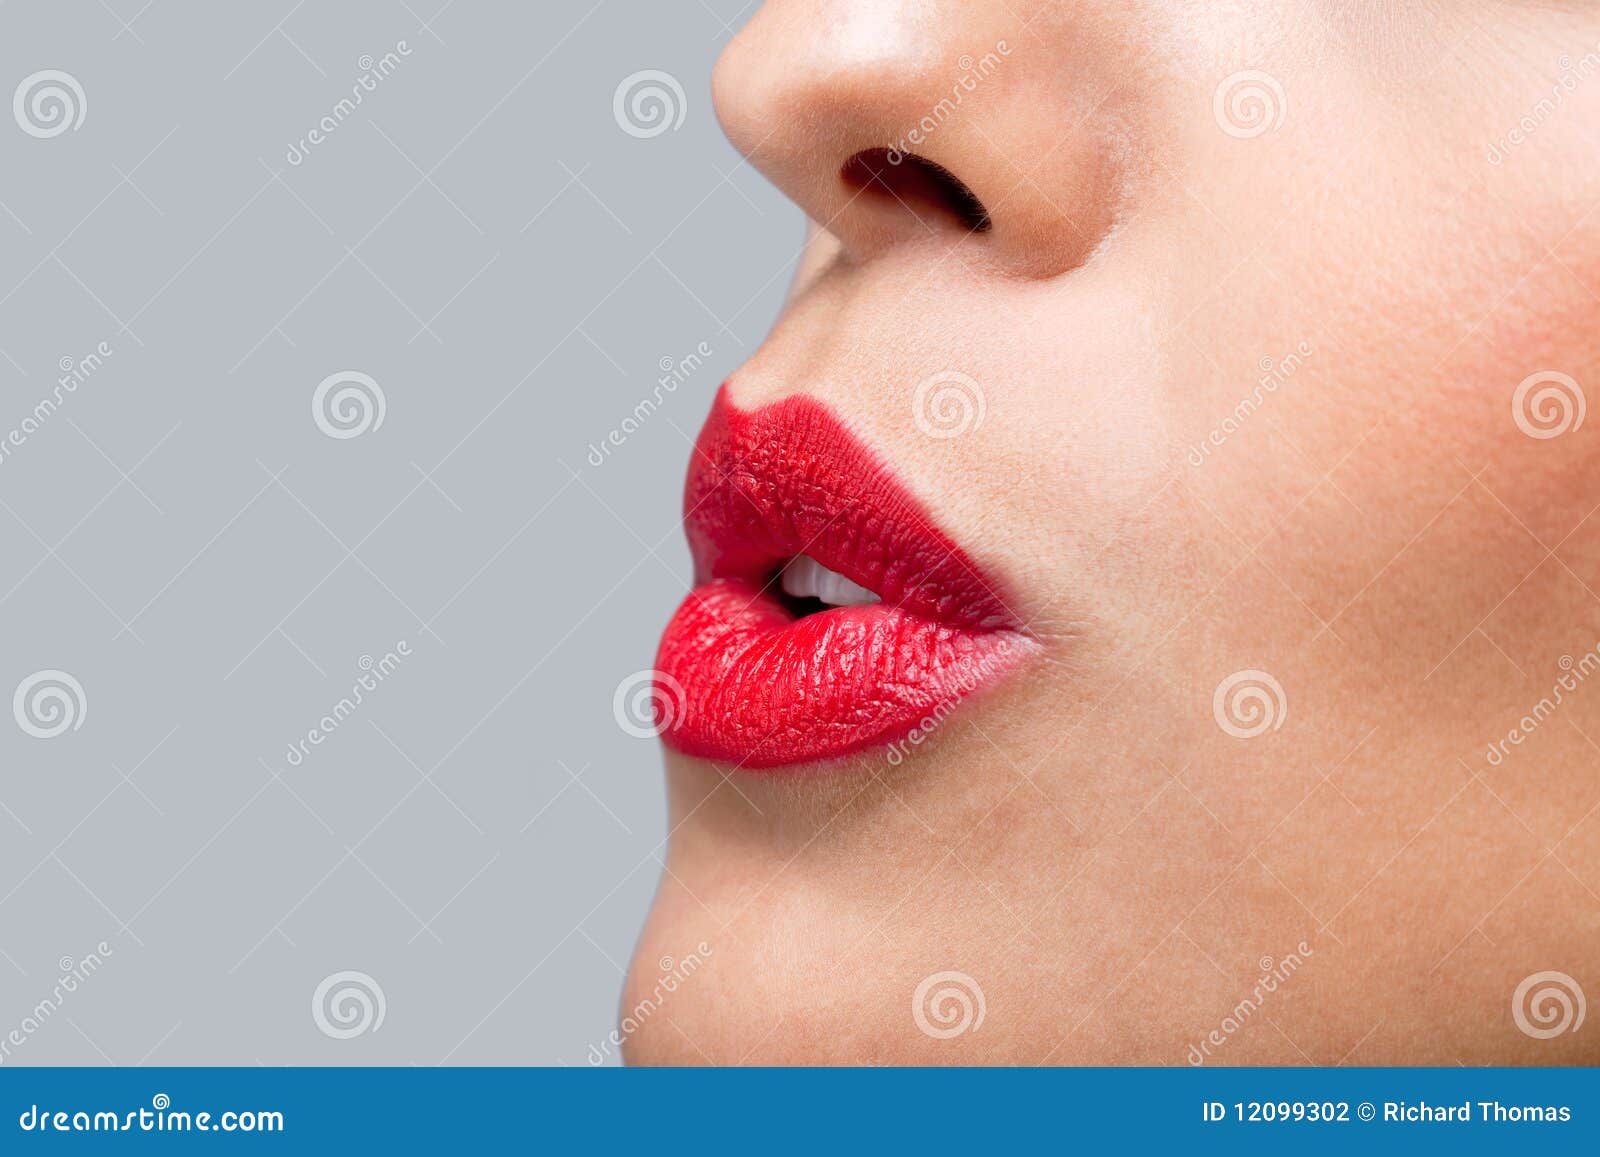 andy winters recommends Images Of Lips Blowing A Kiss